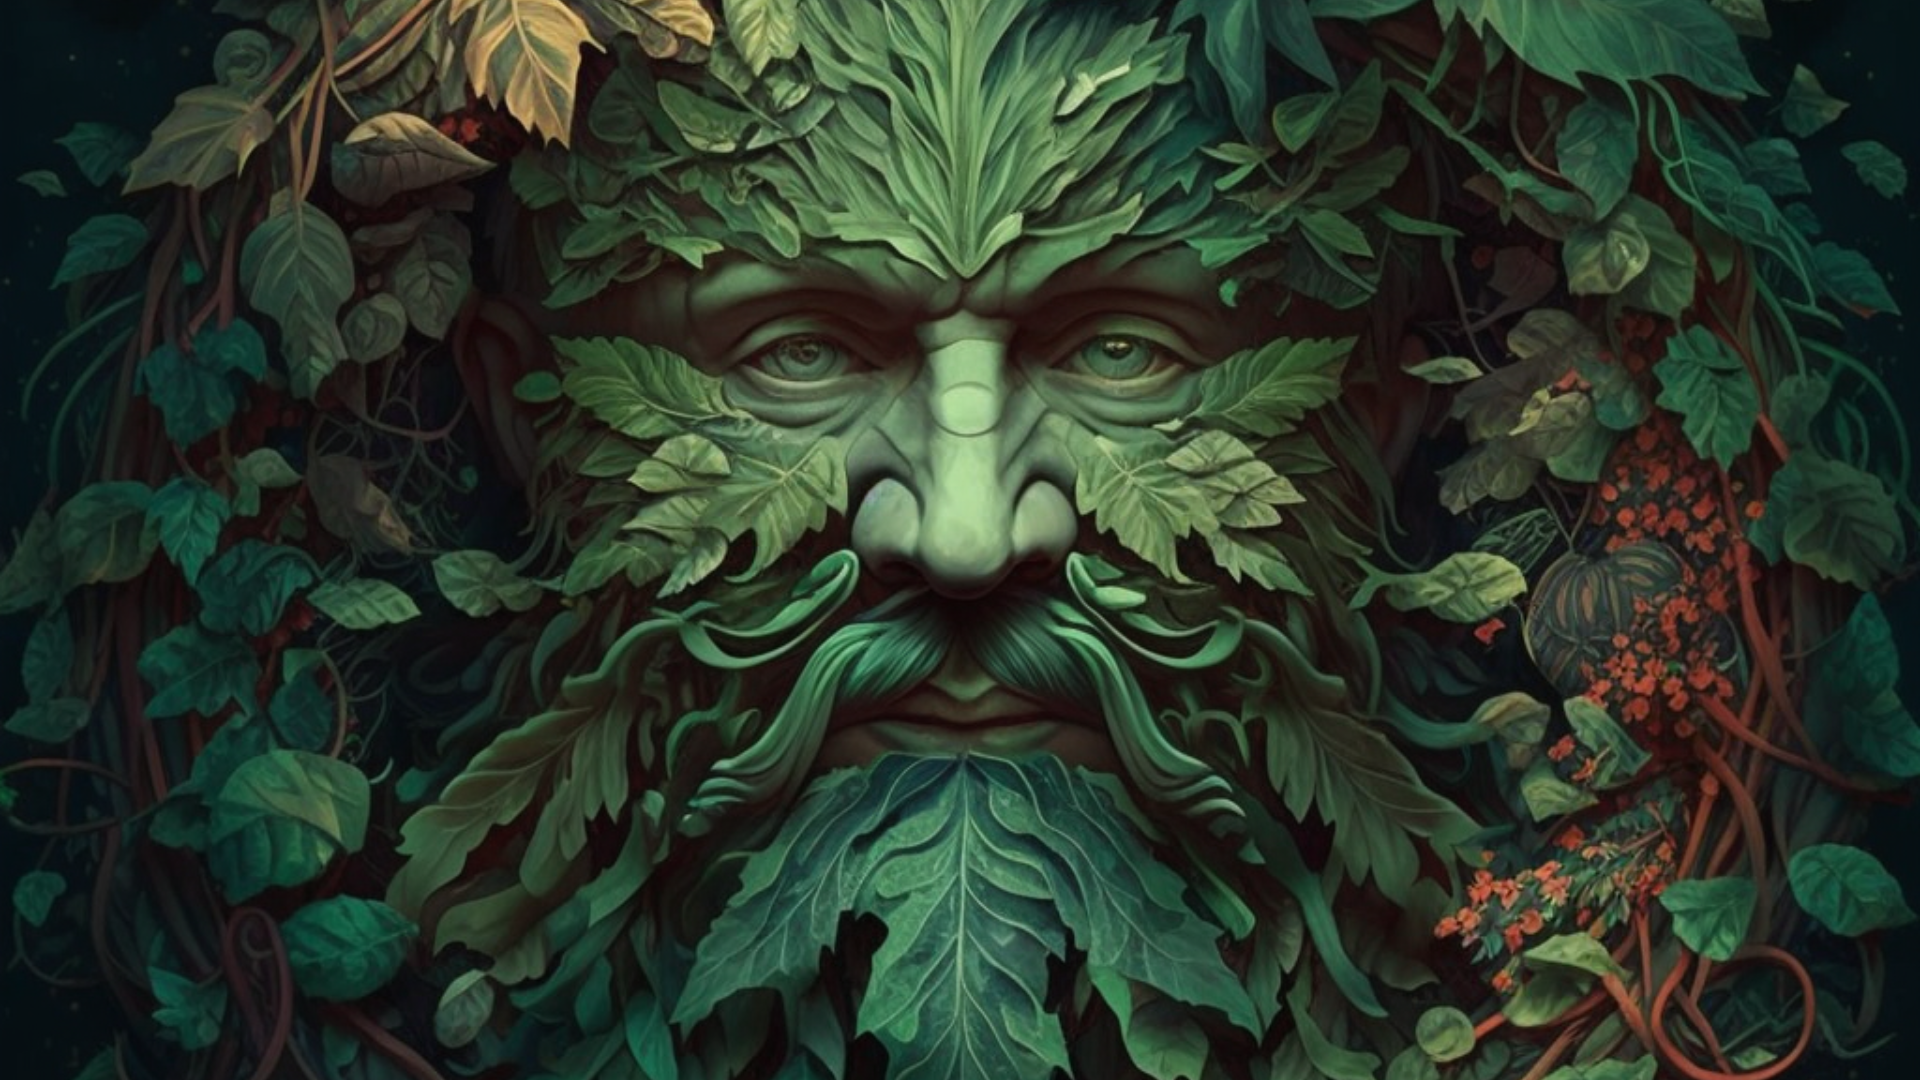 The Enigmatic Green Man